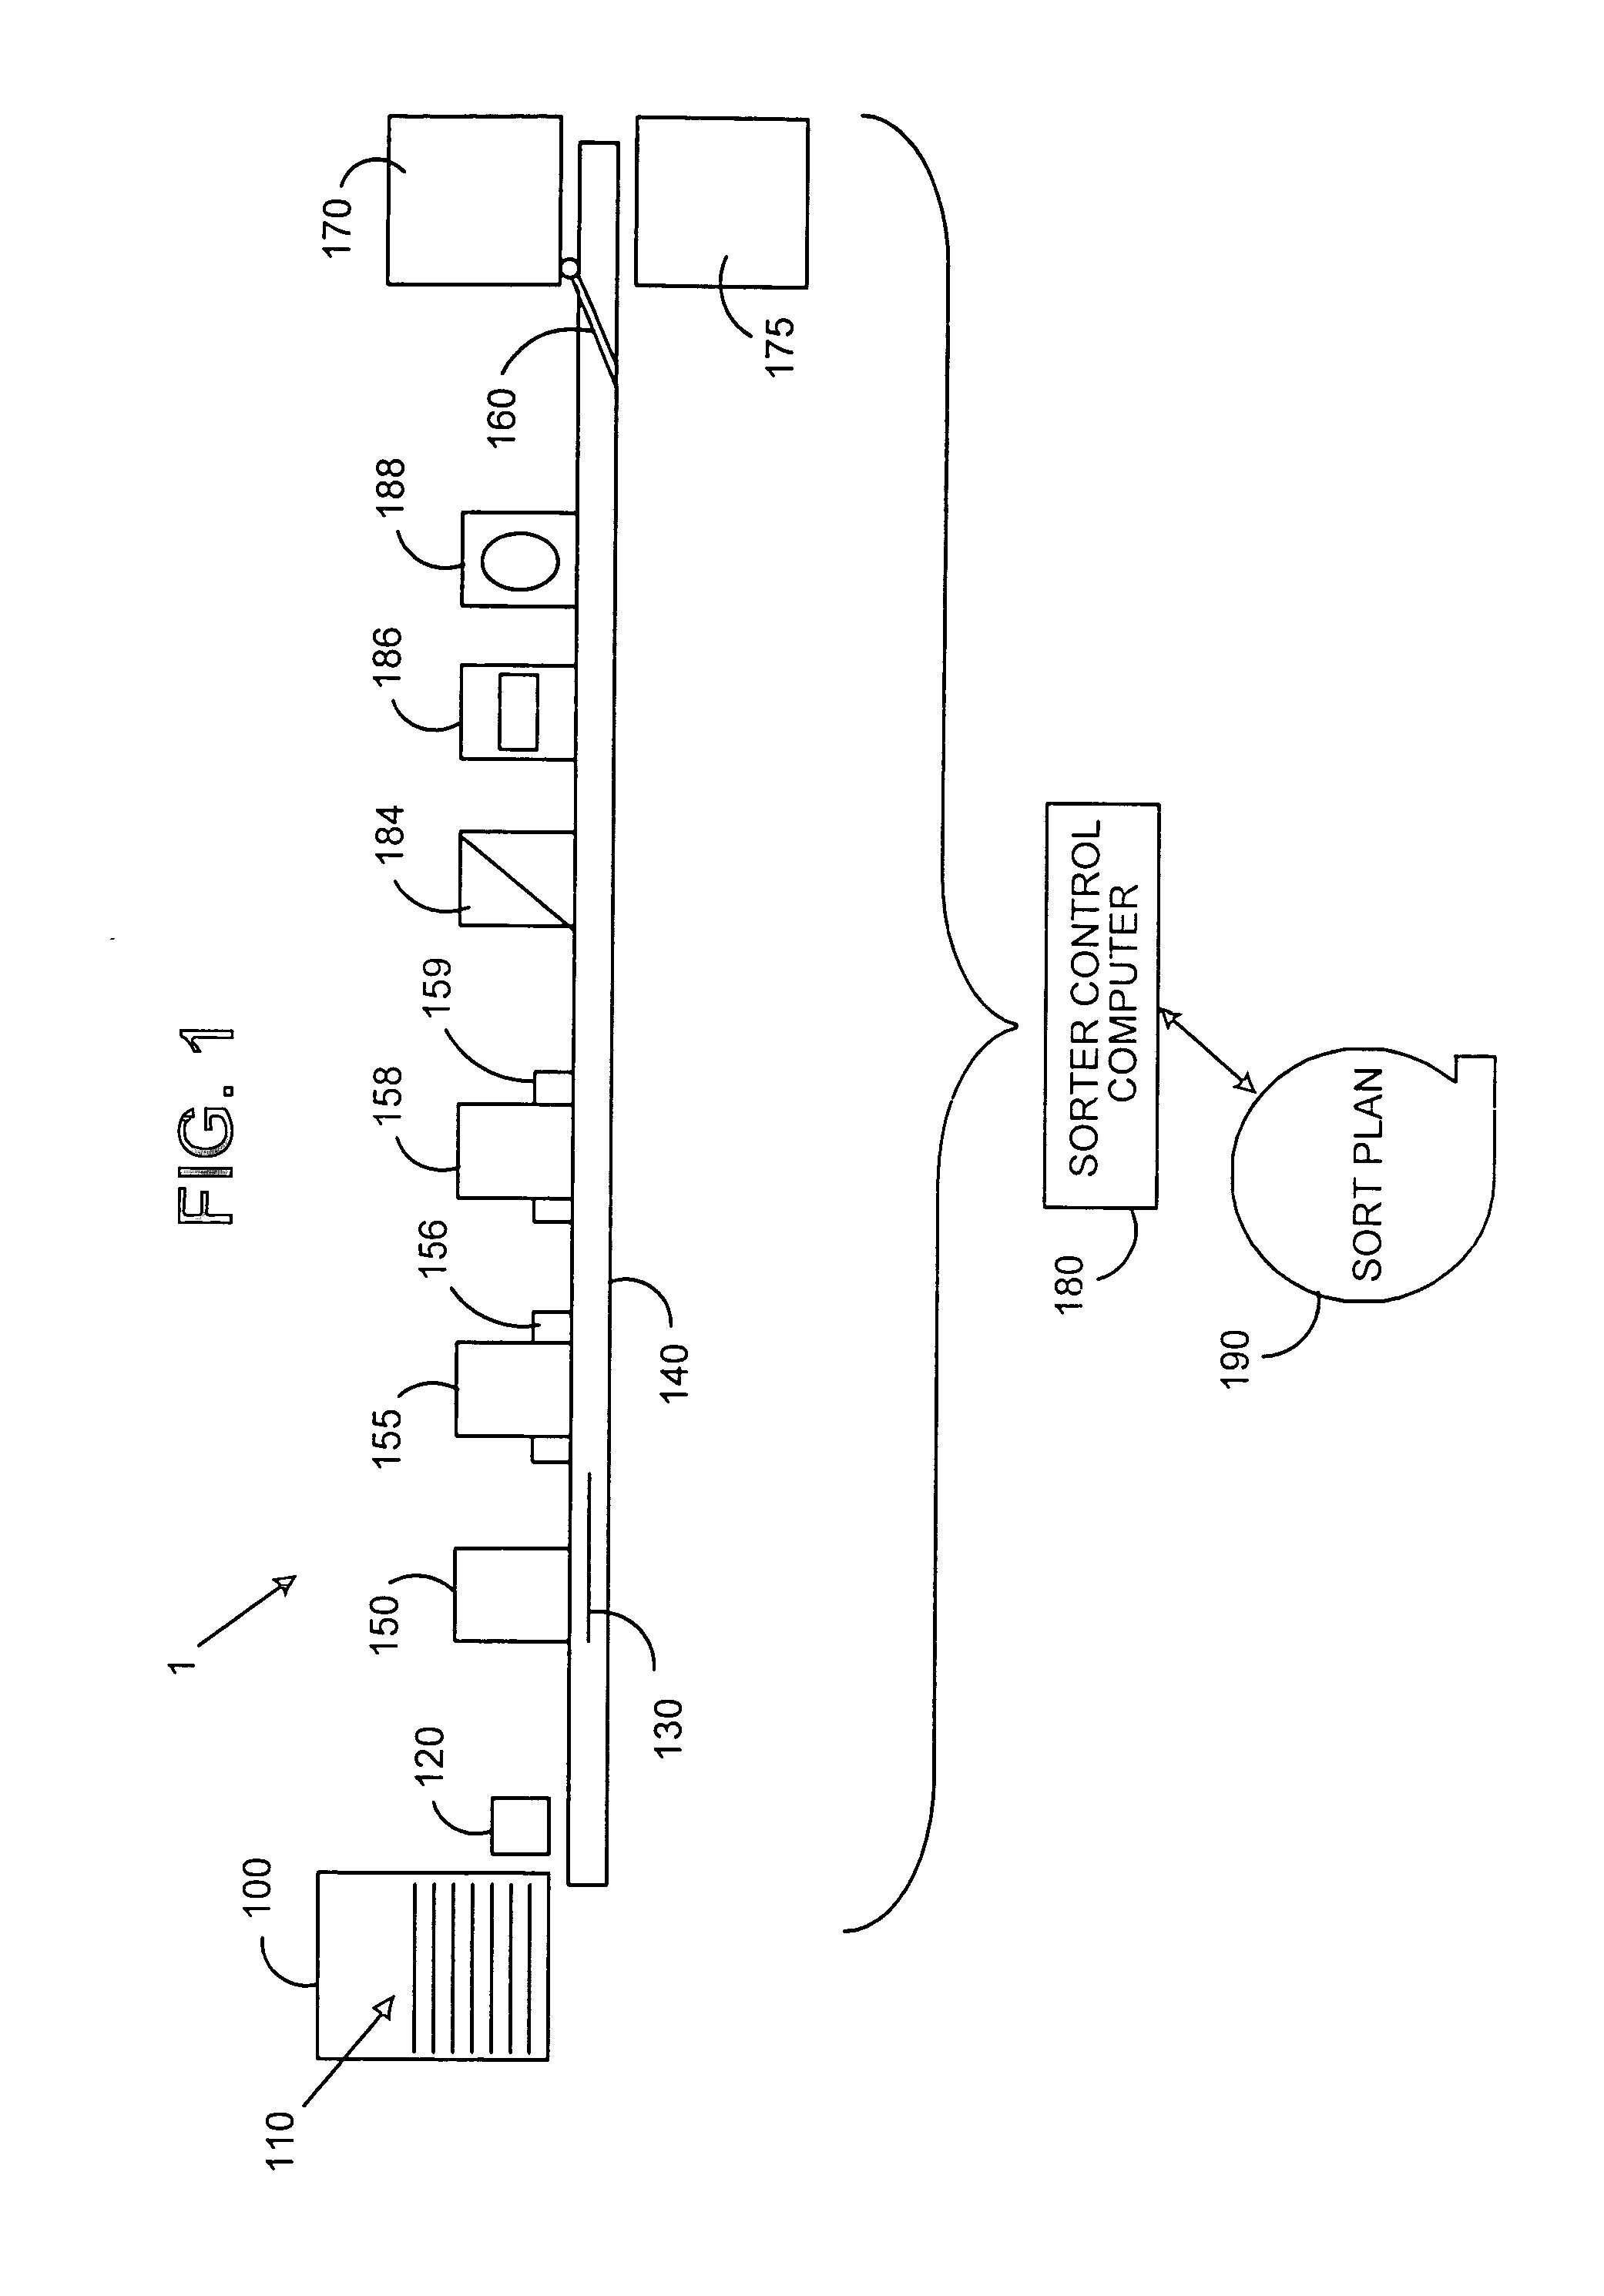 Bar code recognition method and system for paper handling equipment